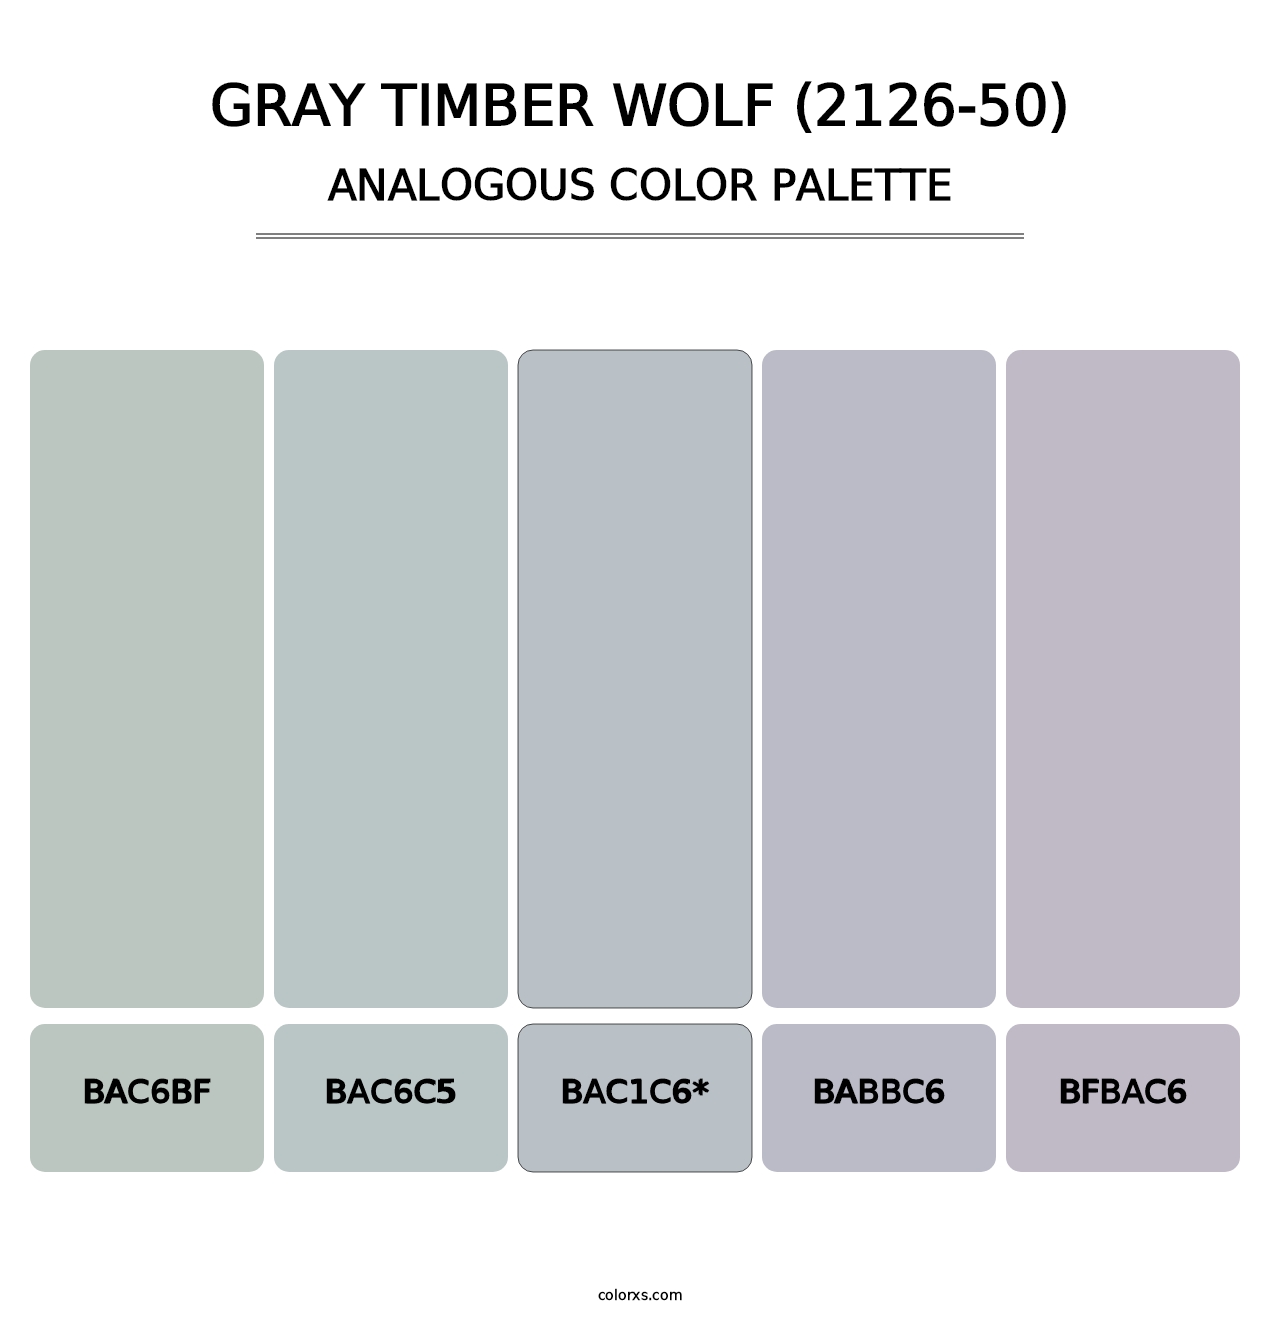 Gray Timber Wolf (2126-50) - Analogous Color Palette